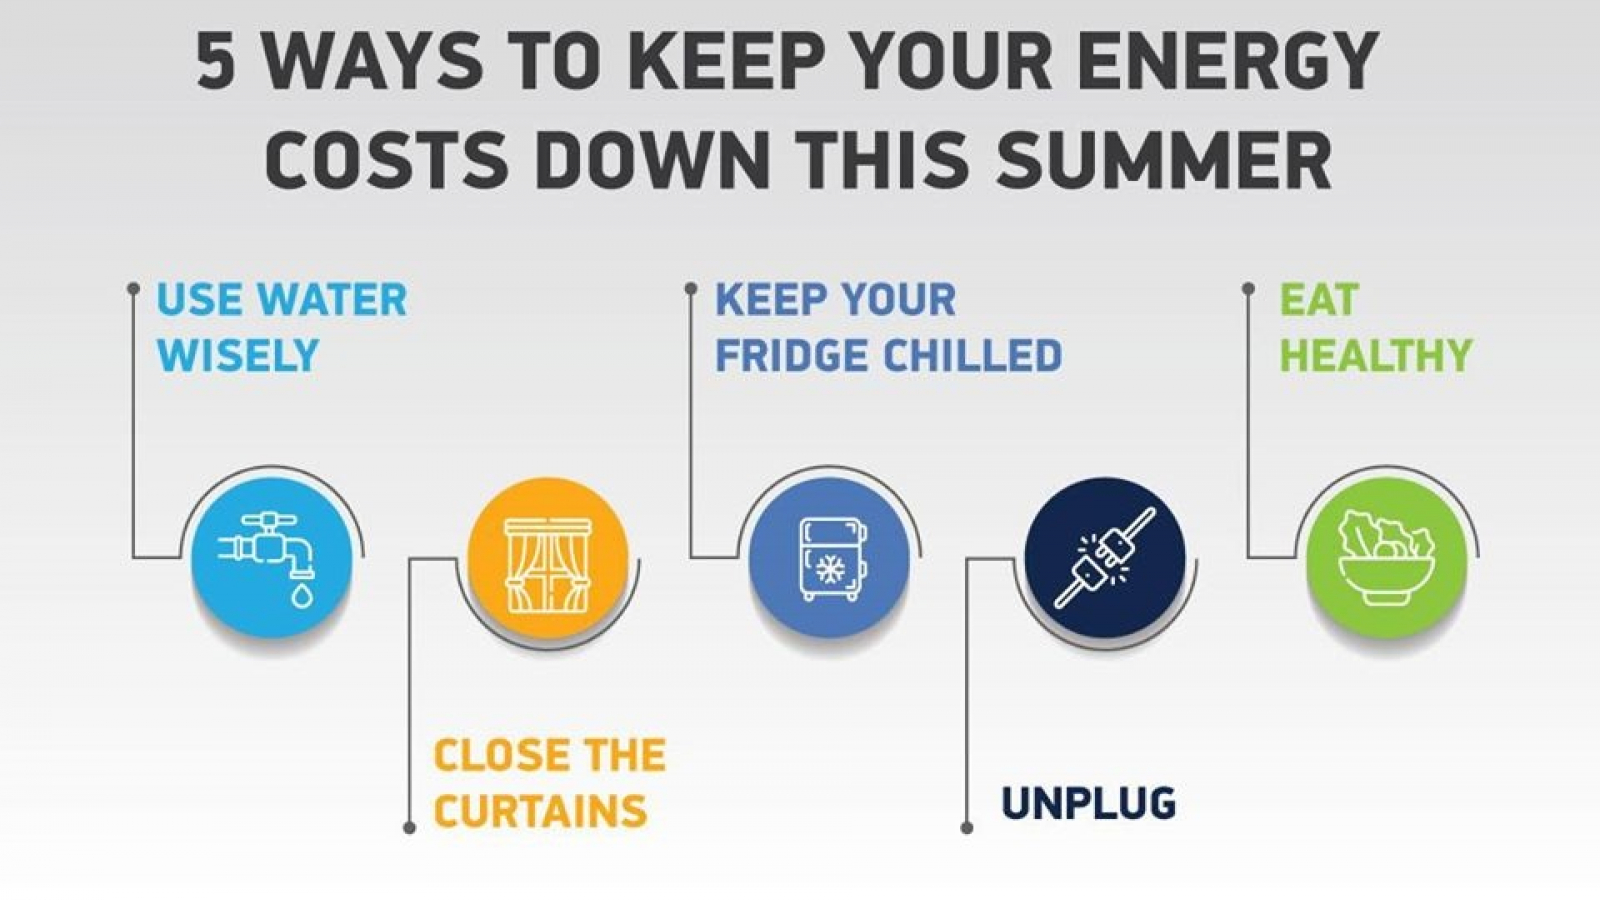 EU4Energy shares tips on being more energy efficient and reducing energy costs 